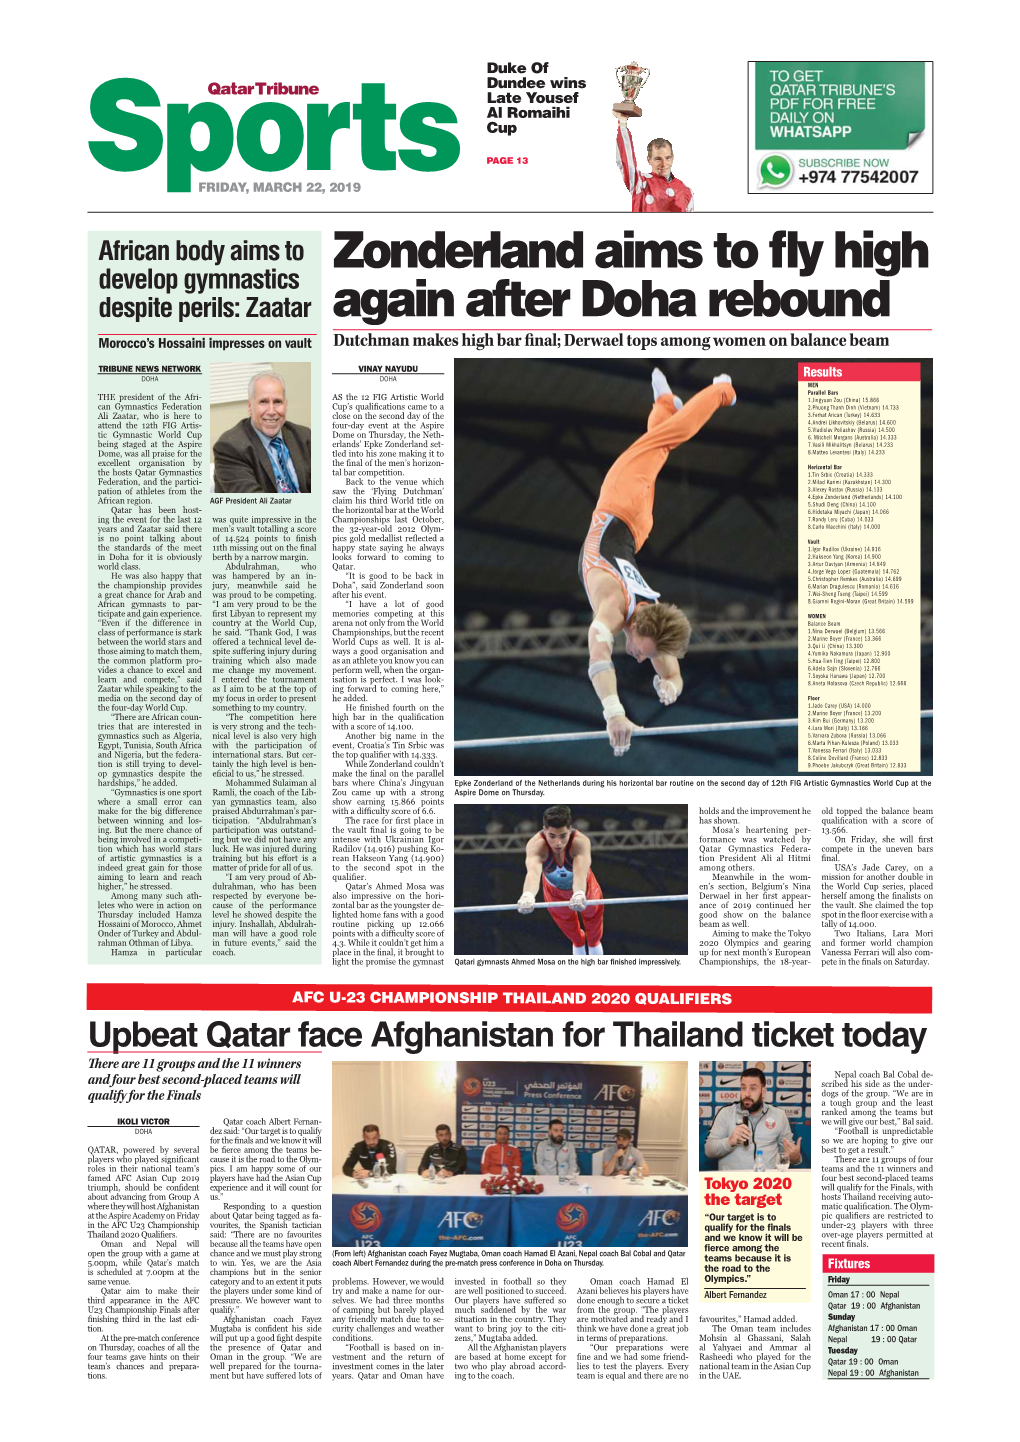 Zonderland Aims to Fly High Again After Doha Rebound